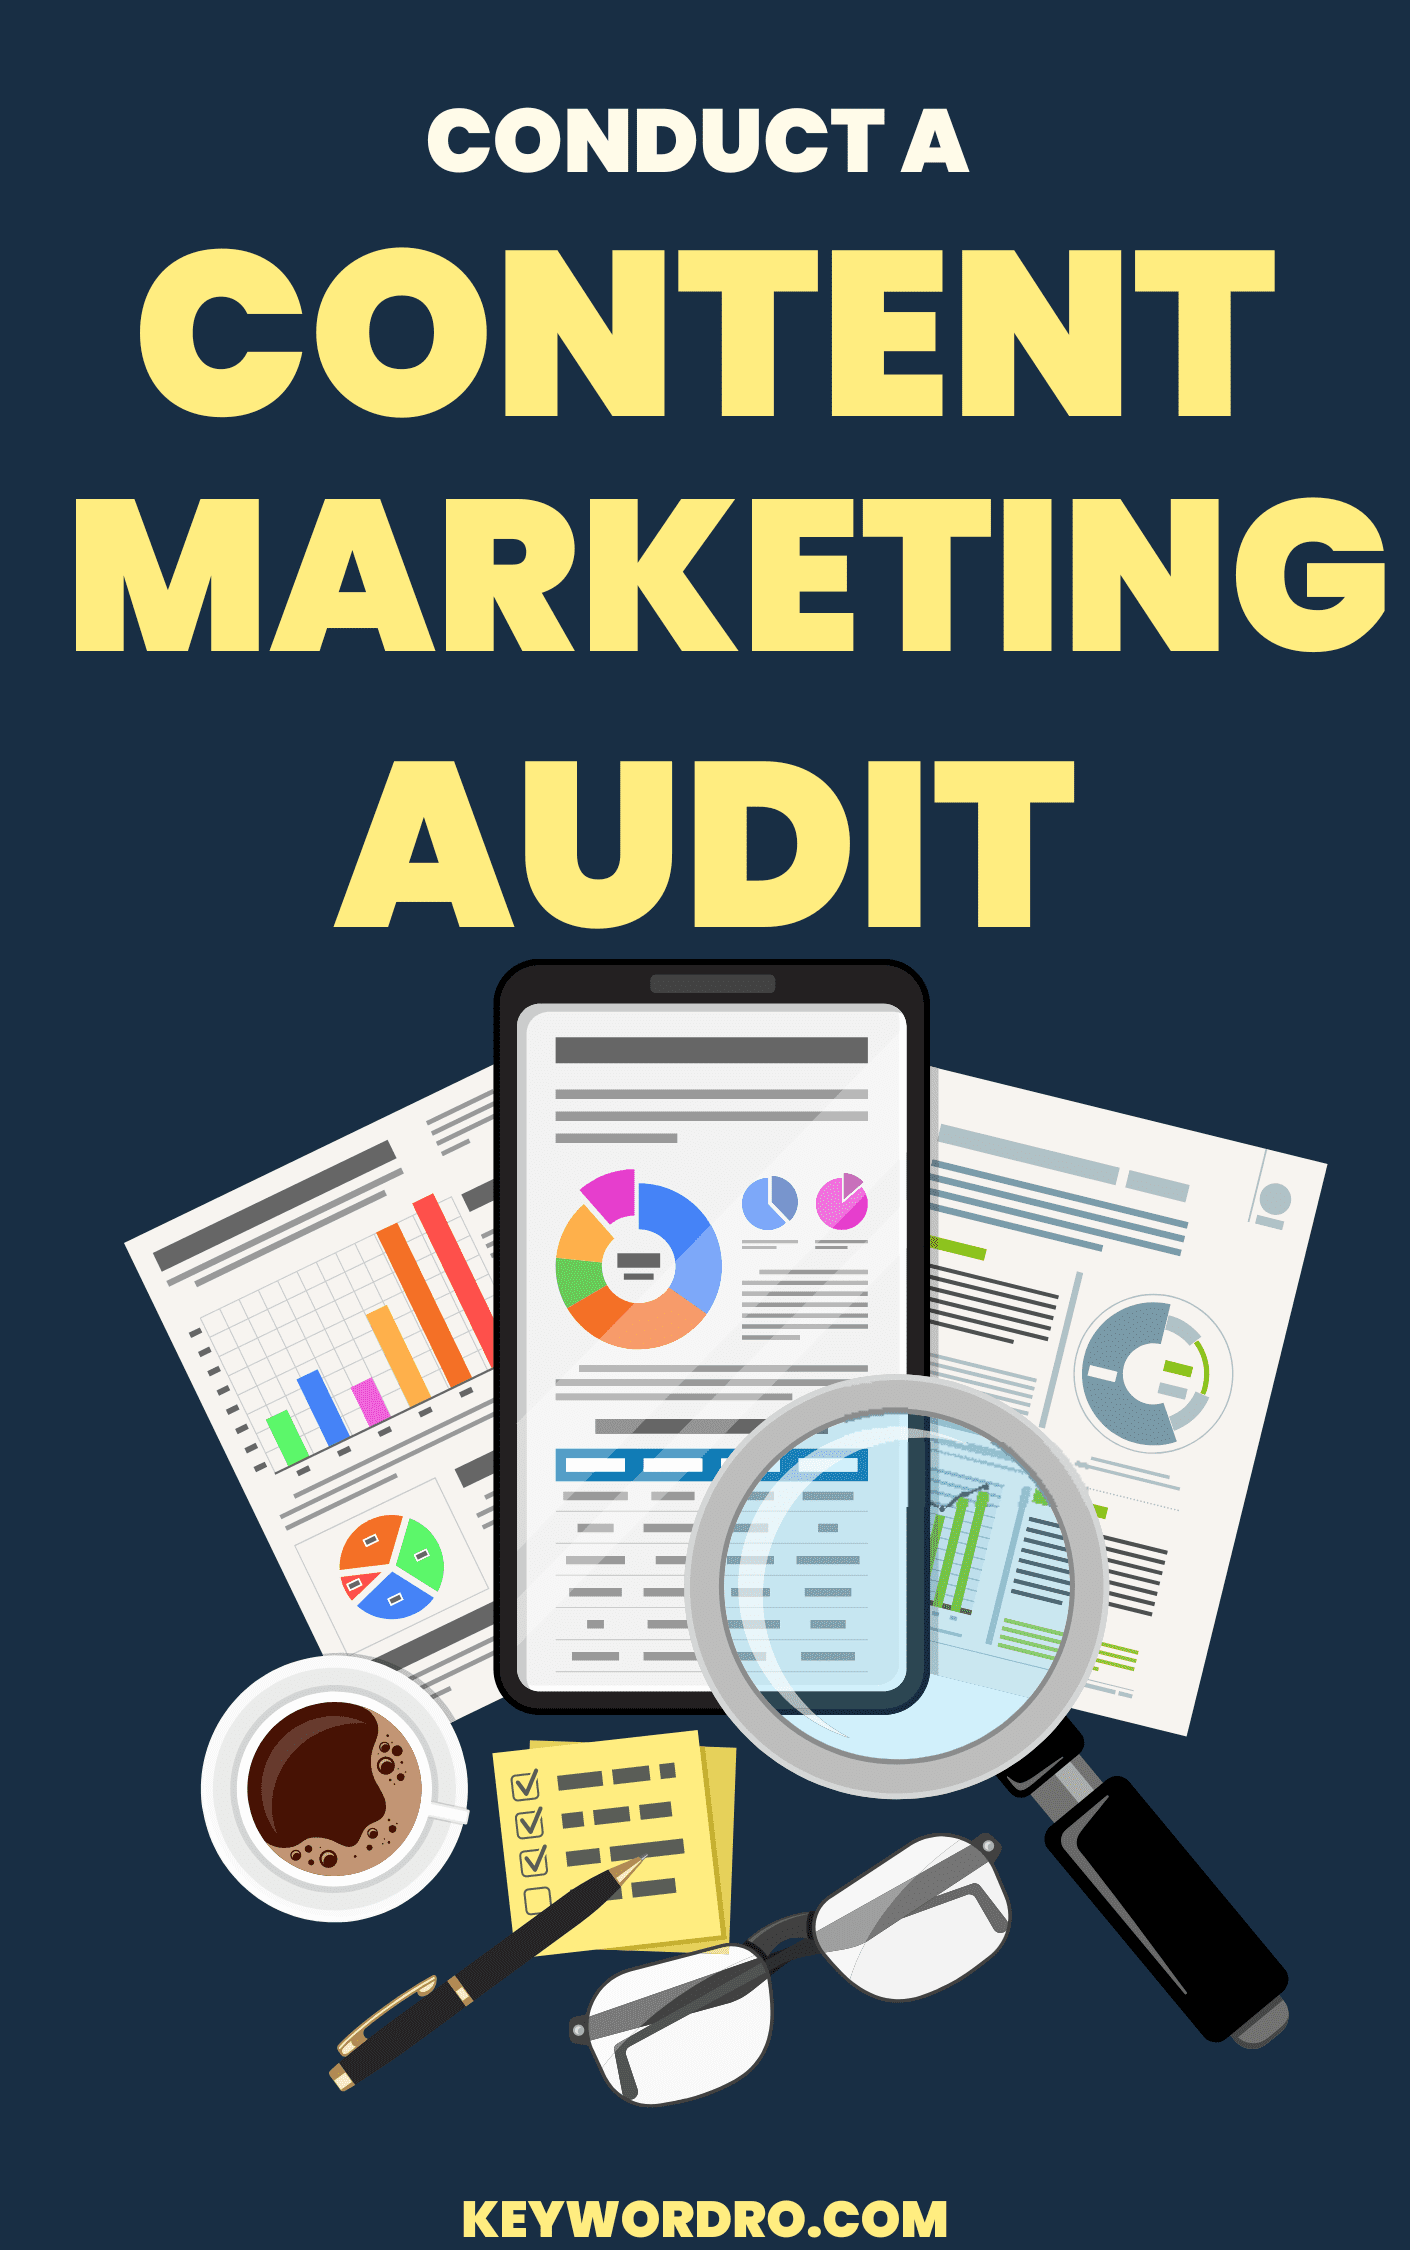 HOW TO CONDUCT A CONTENT MARKETING AUDIT Ebook